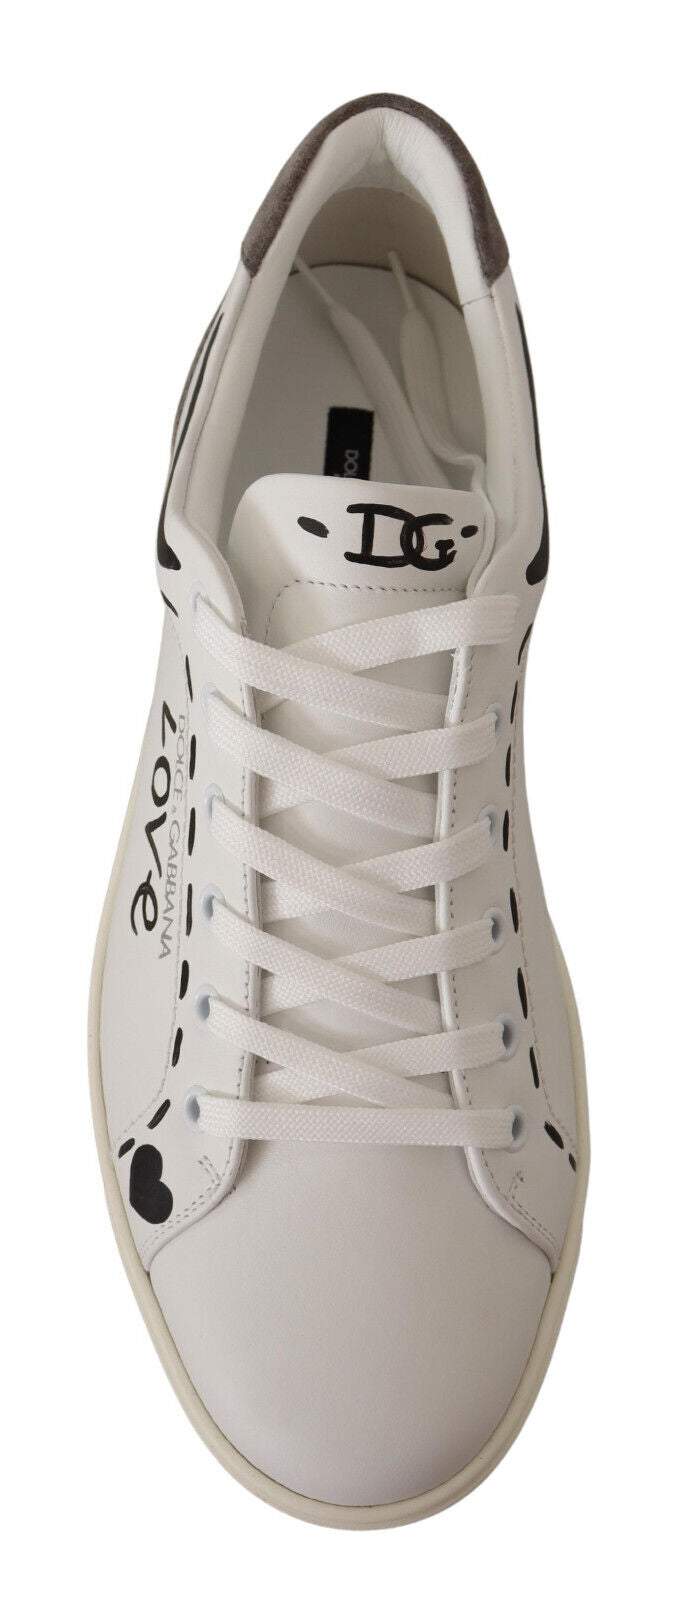 Dolce & Gabbana White Leather Gray LOVE Casual Sneakers Shoes #men, Dolce & Gabbana, EU39.5/US6.5, EU40/US7, EU41.5/US8.5, EU41/US8, EU42.5/US9.5, EU42/US9, EU43/US10, EU44/US11, feed-1, Sneakers - Men - Shoes, White at SEYMAYKA